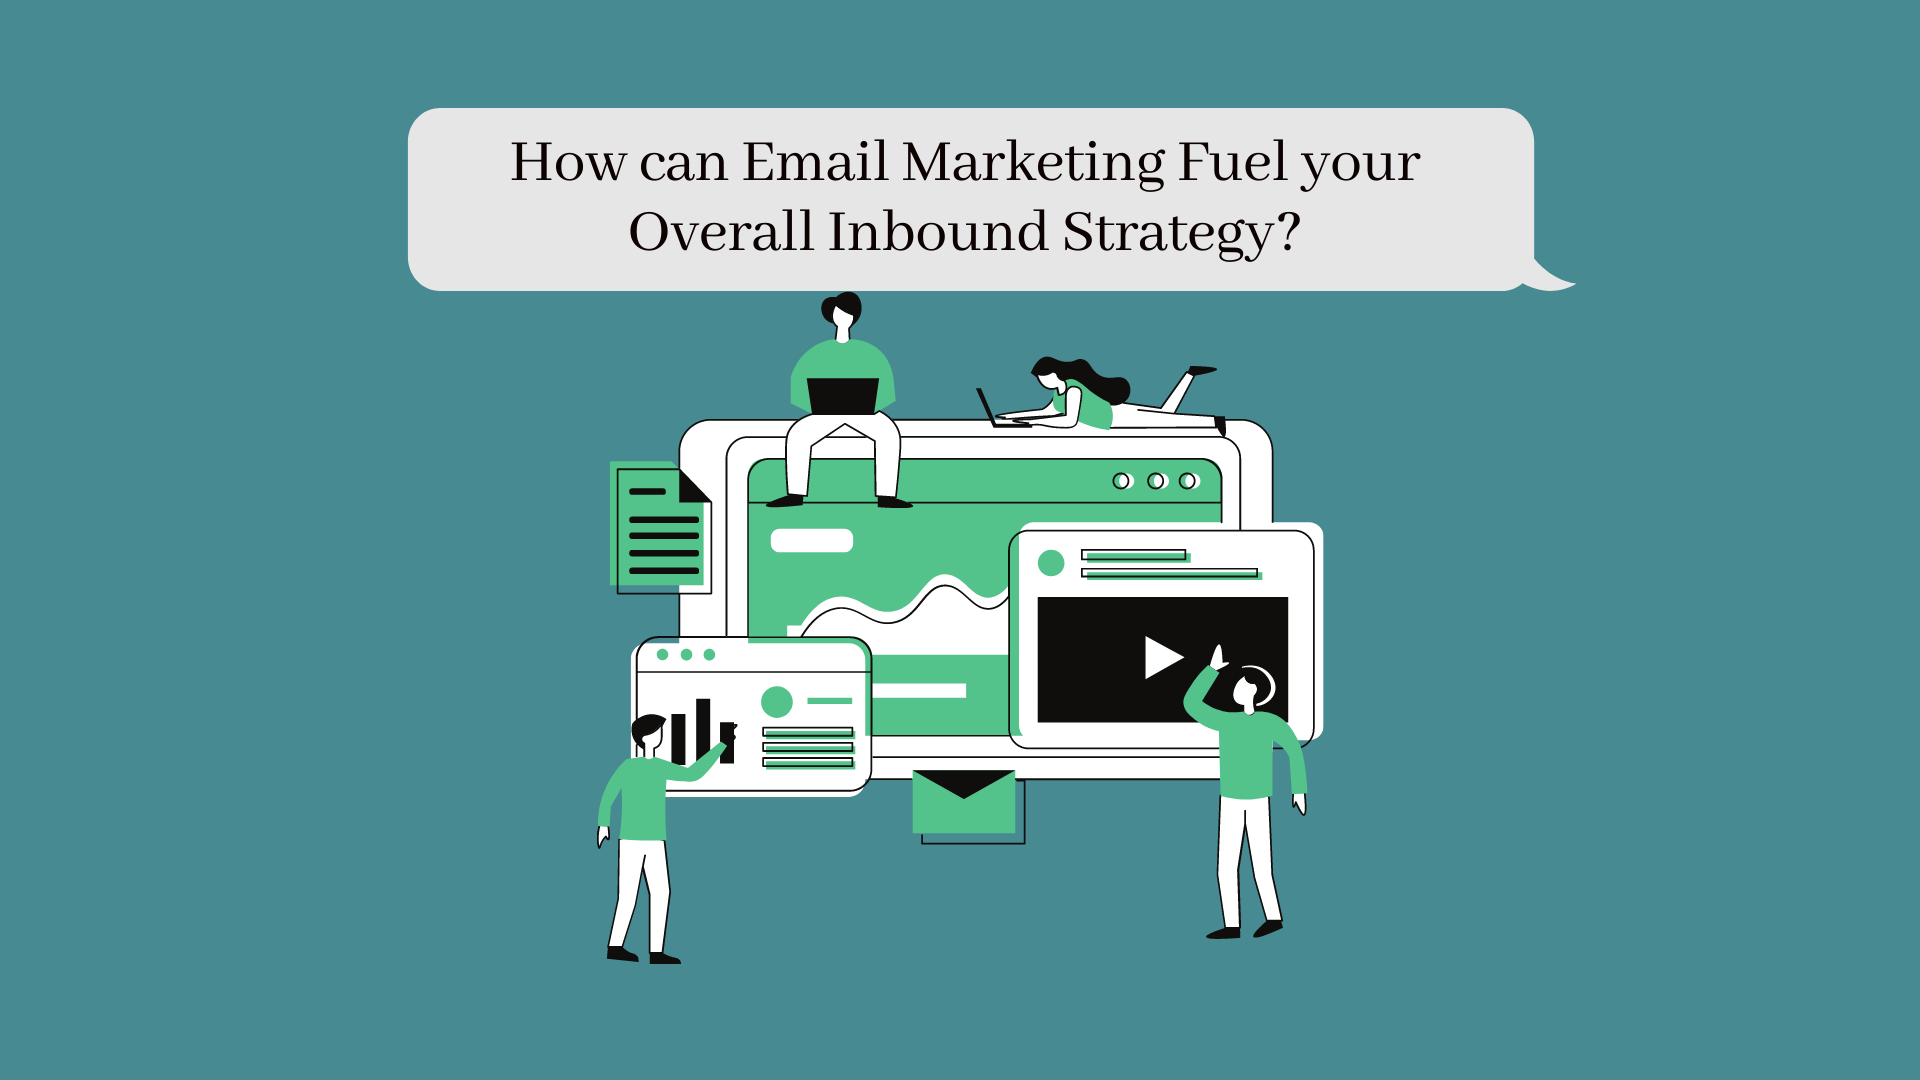 How can Email Marketing Fuel your Overall Inbound Strategy?